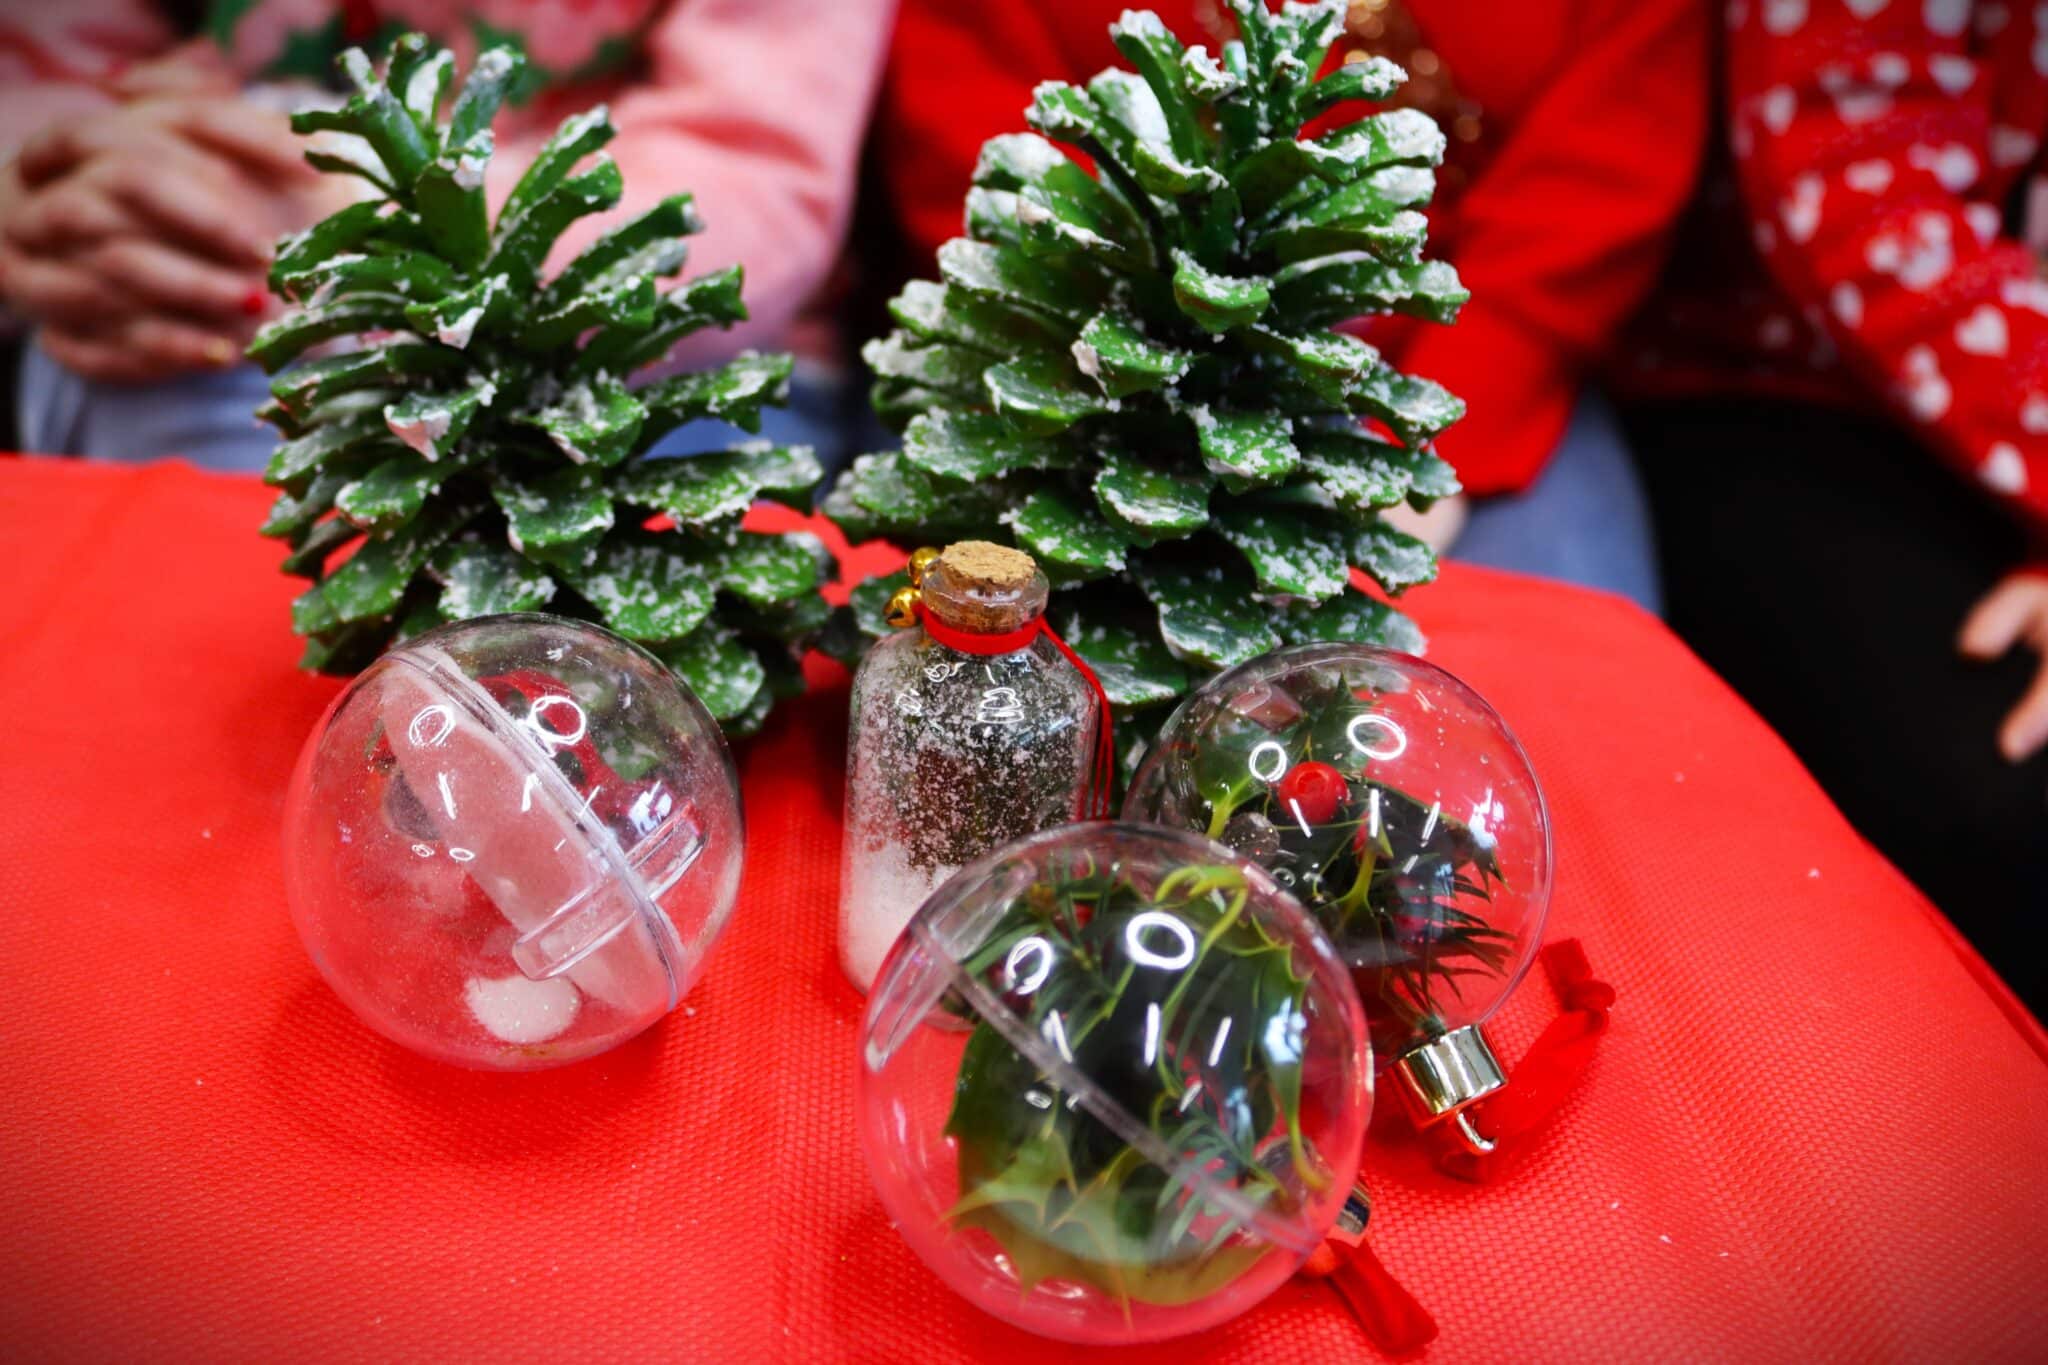 Foundation Learning students get into the Christmas business - decorations